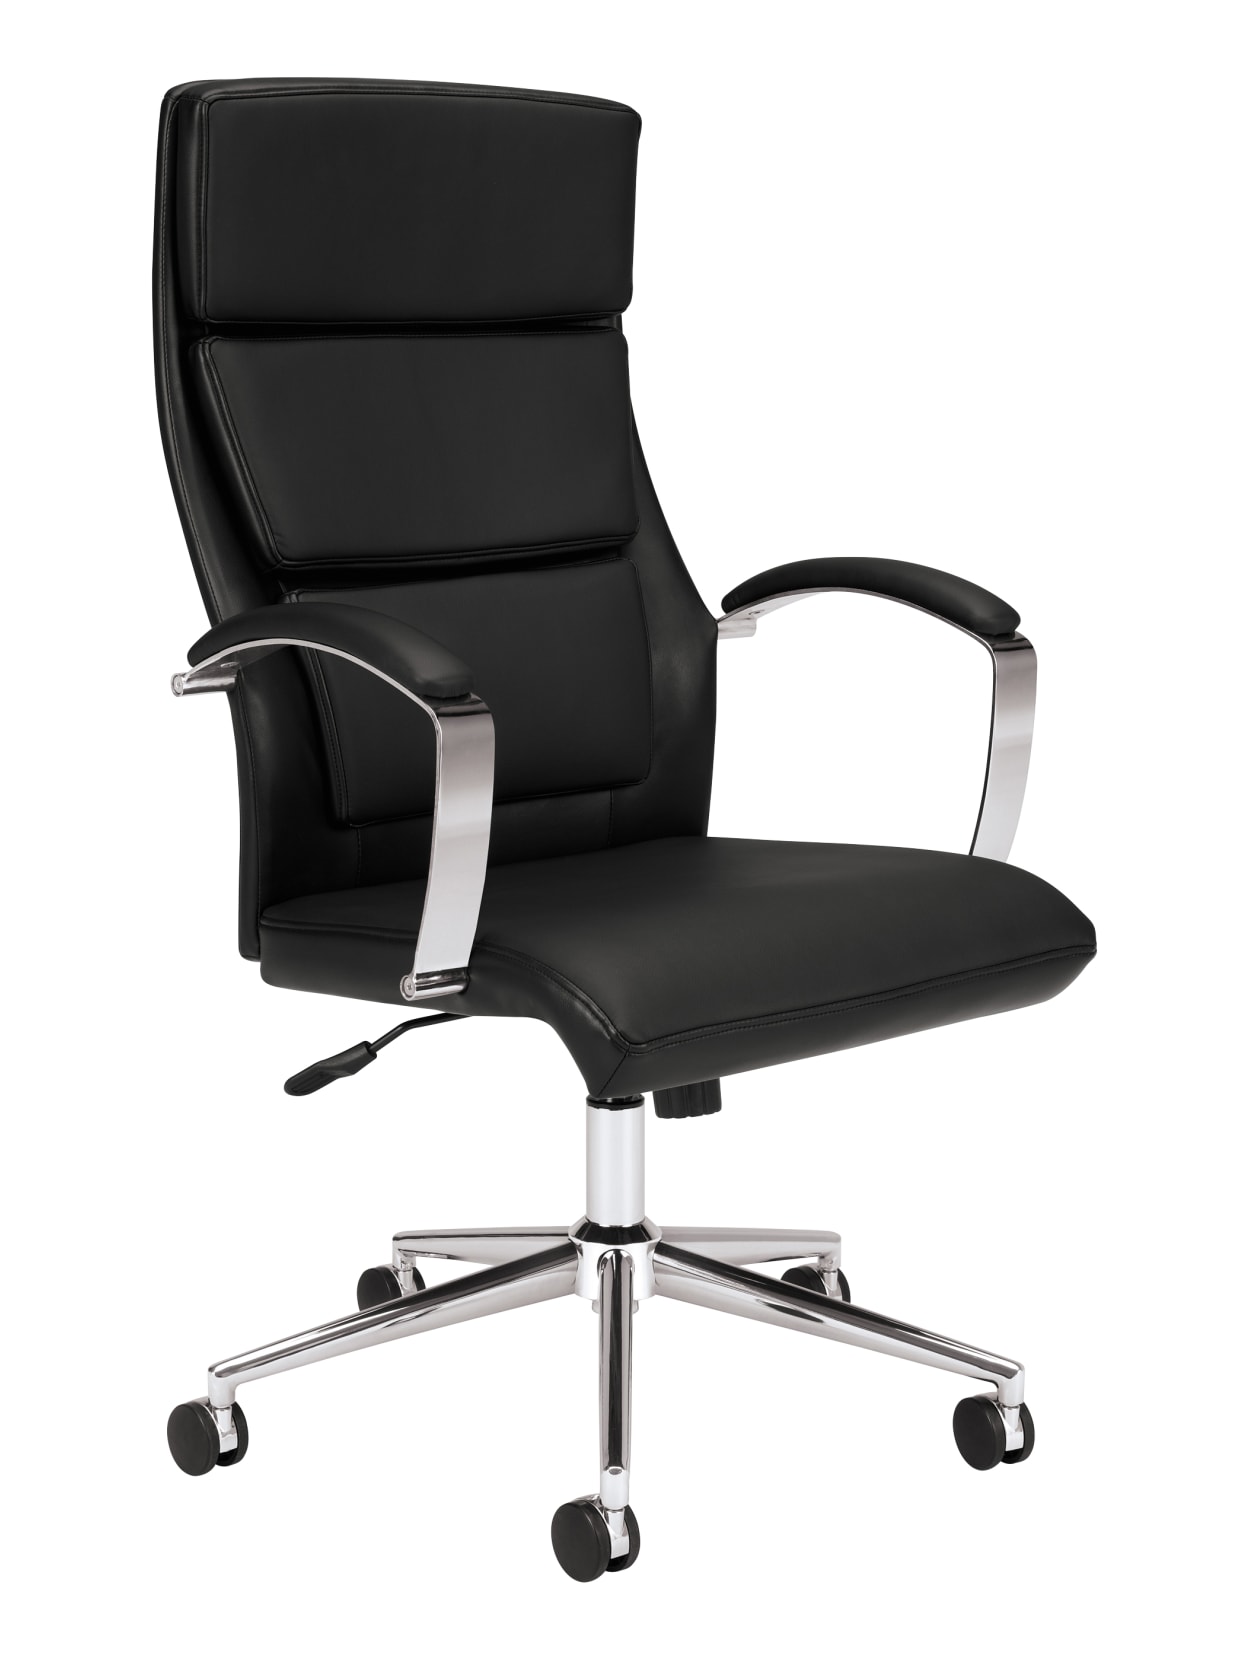 Hon Leather High Back Chair Black Office Depot